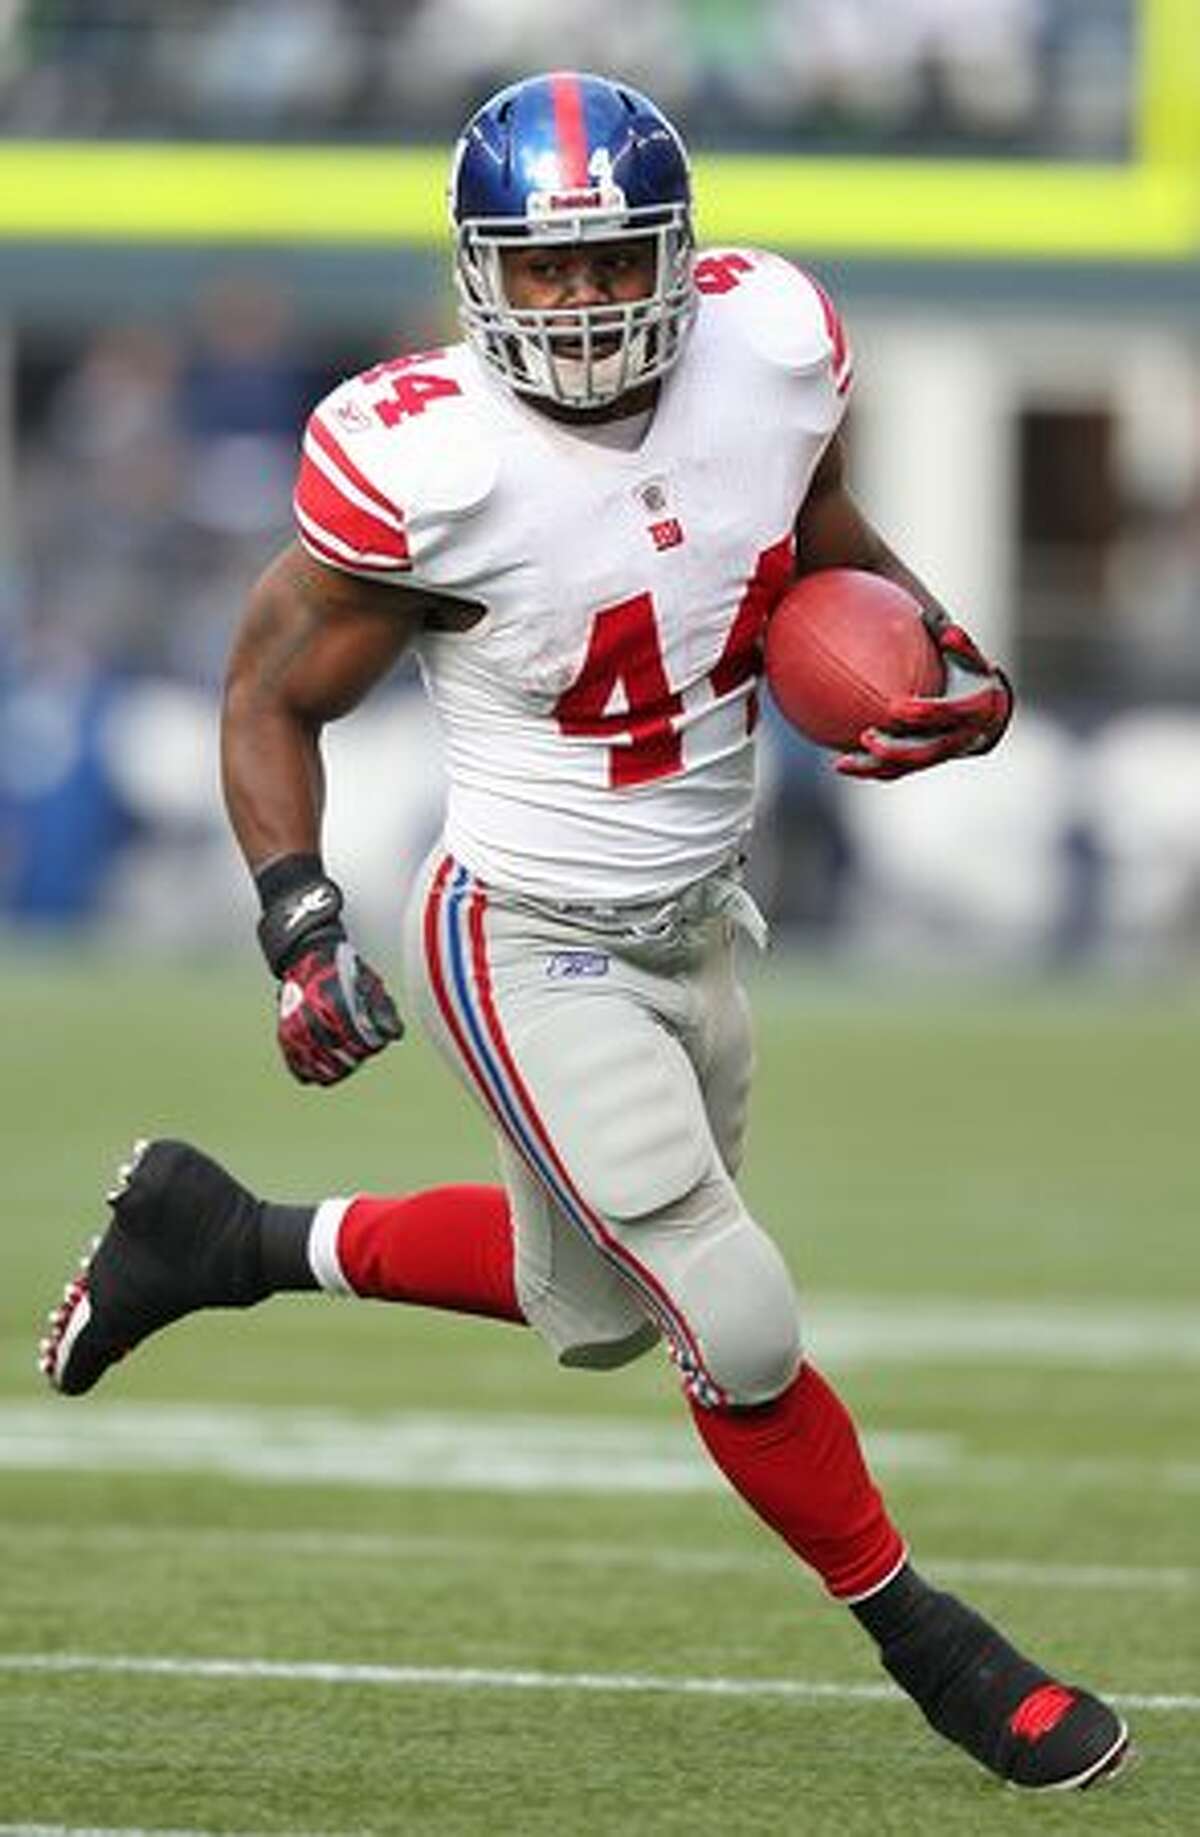 Running back Ahmad Bradshaw #44 of the New York Giants rushes against the Seattle Seahawks.